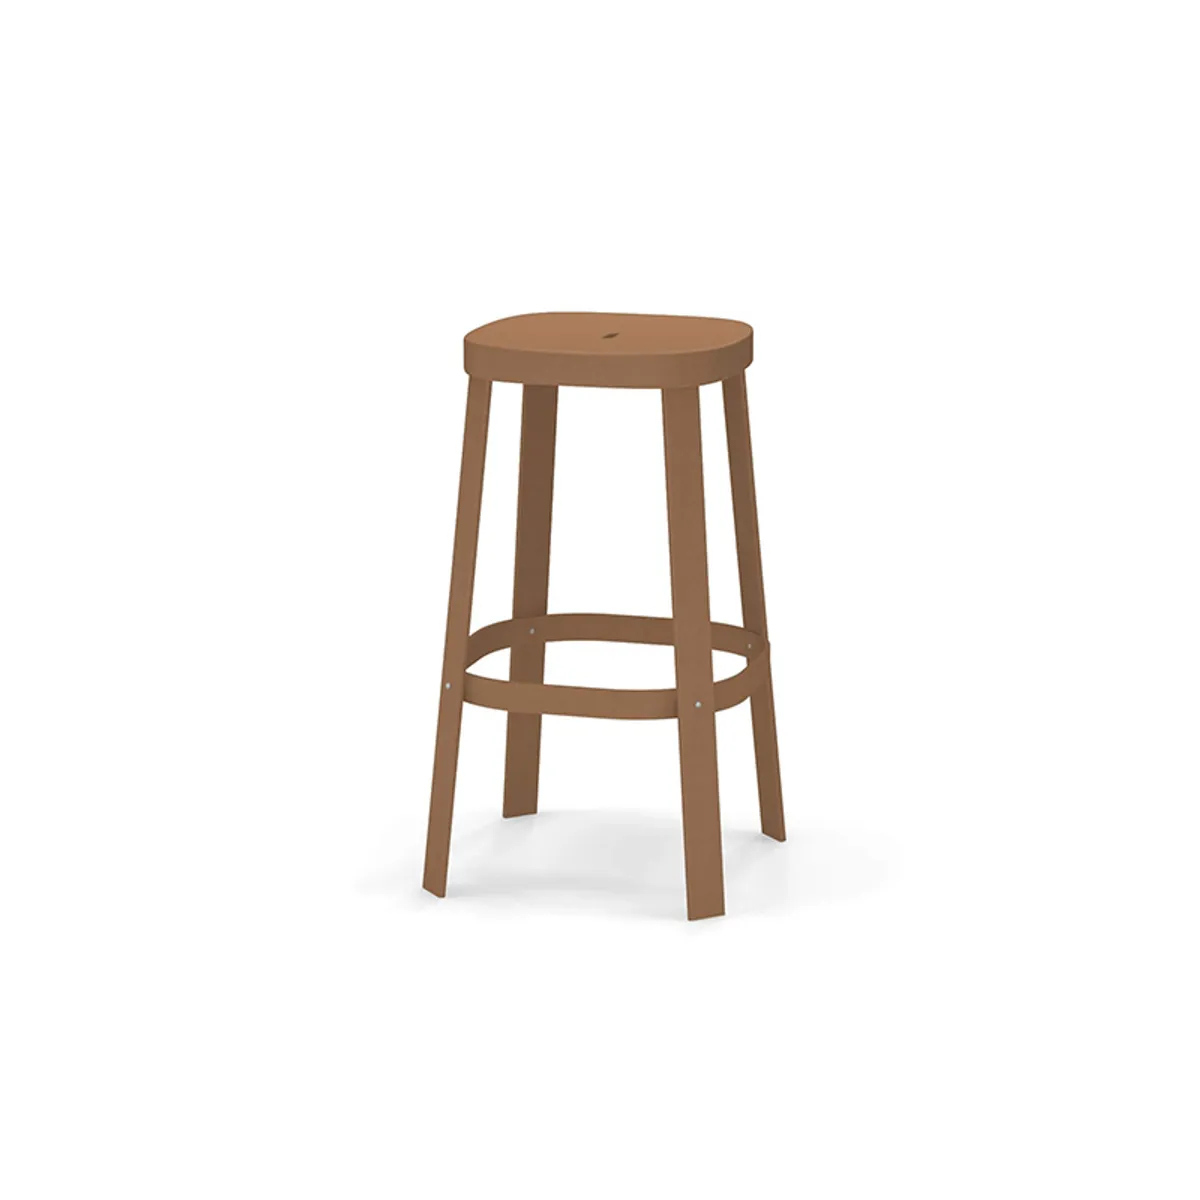 Thor Stool Outdoor Furniture For Hospitality 021